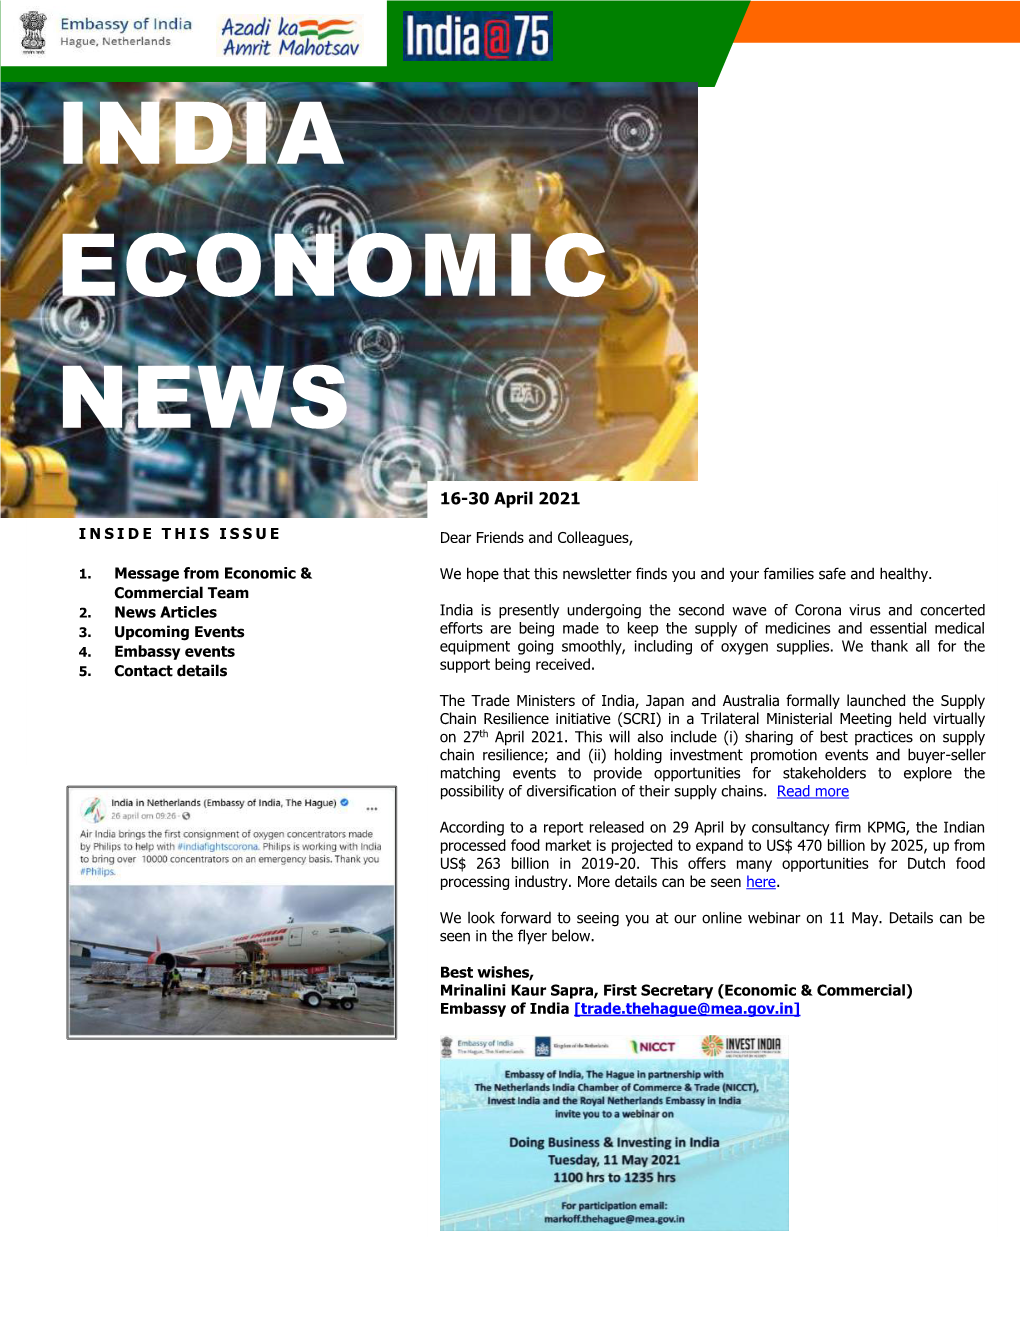 Economic and Commercial Newsletter 16-30 April 2021